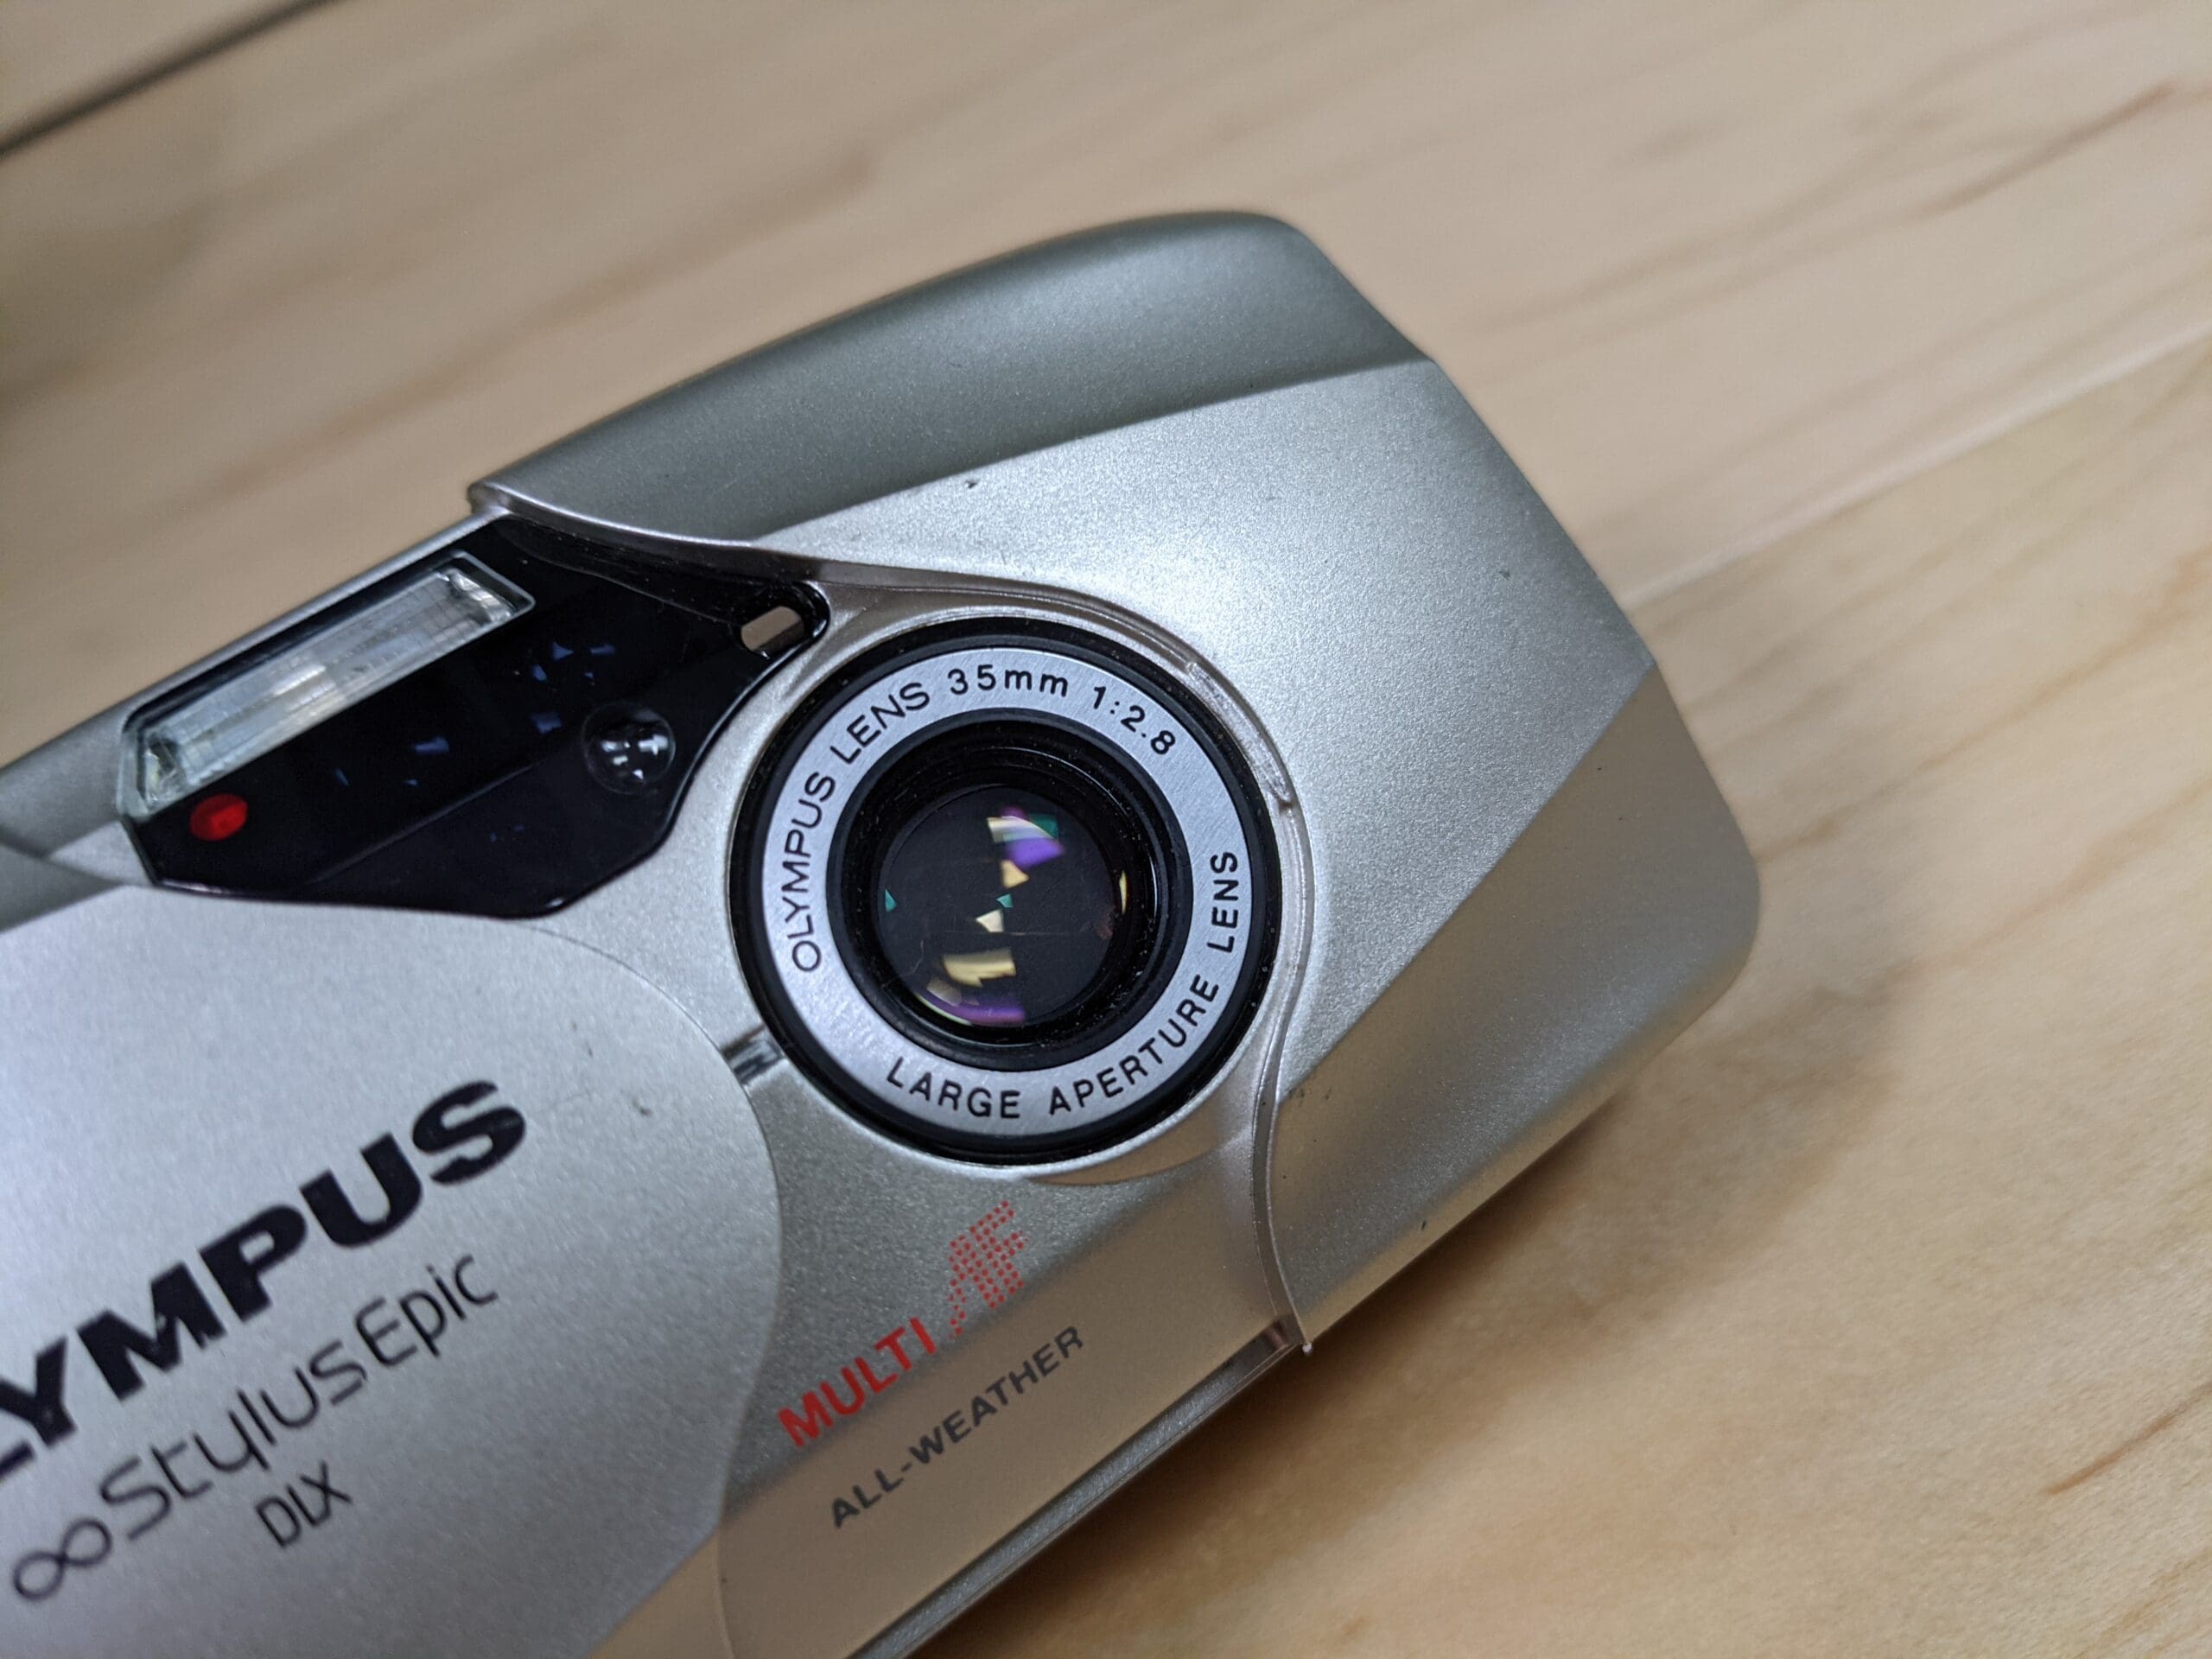 Olympus Stylus Epic DLX MJU II 35mm Point and Shoot Film Camera with 35mm F/2.8 Lens